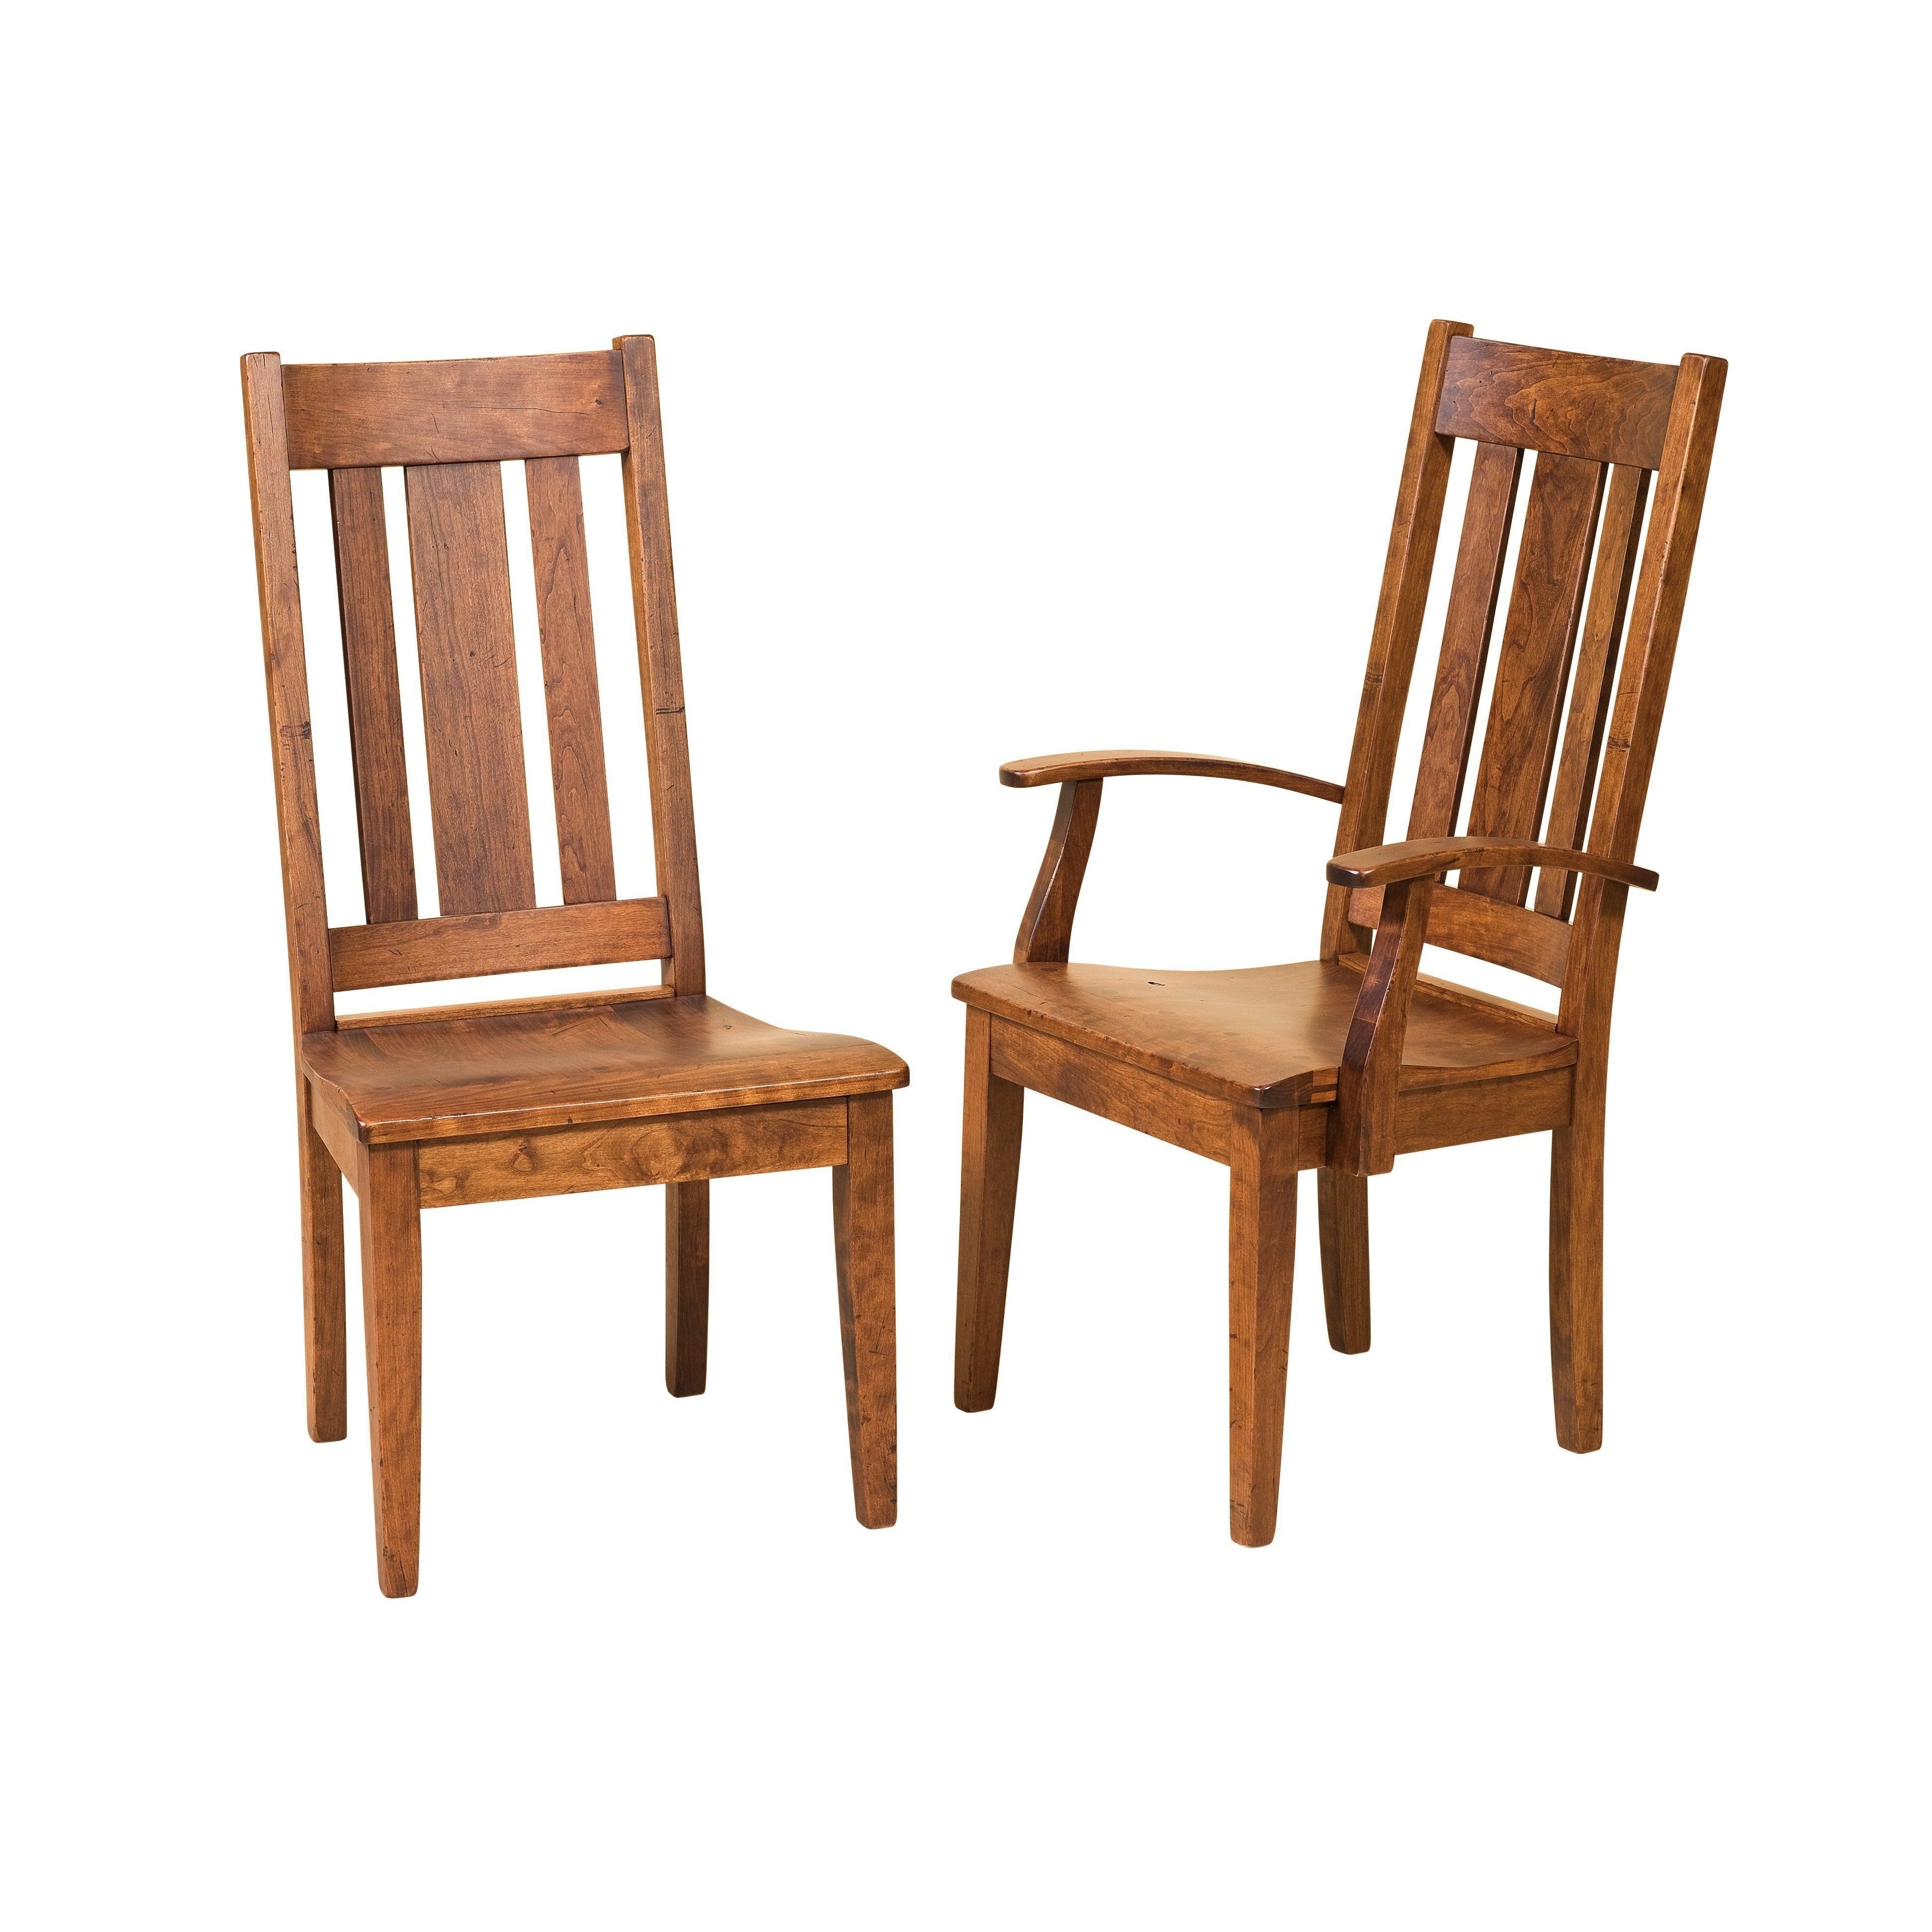 jacoby-chairs-260168.jpg